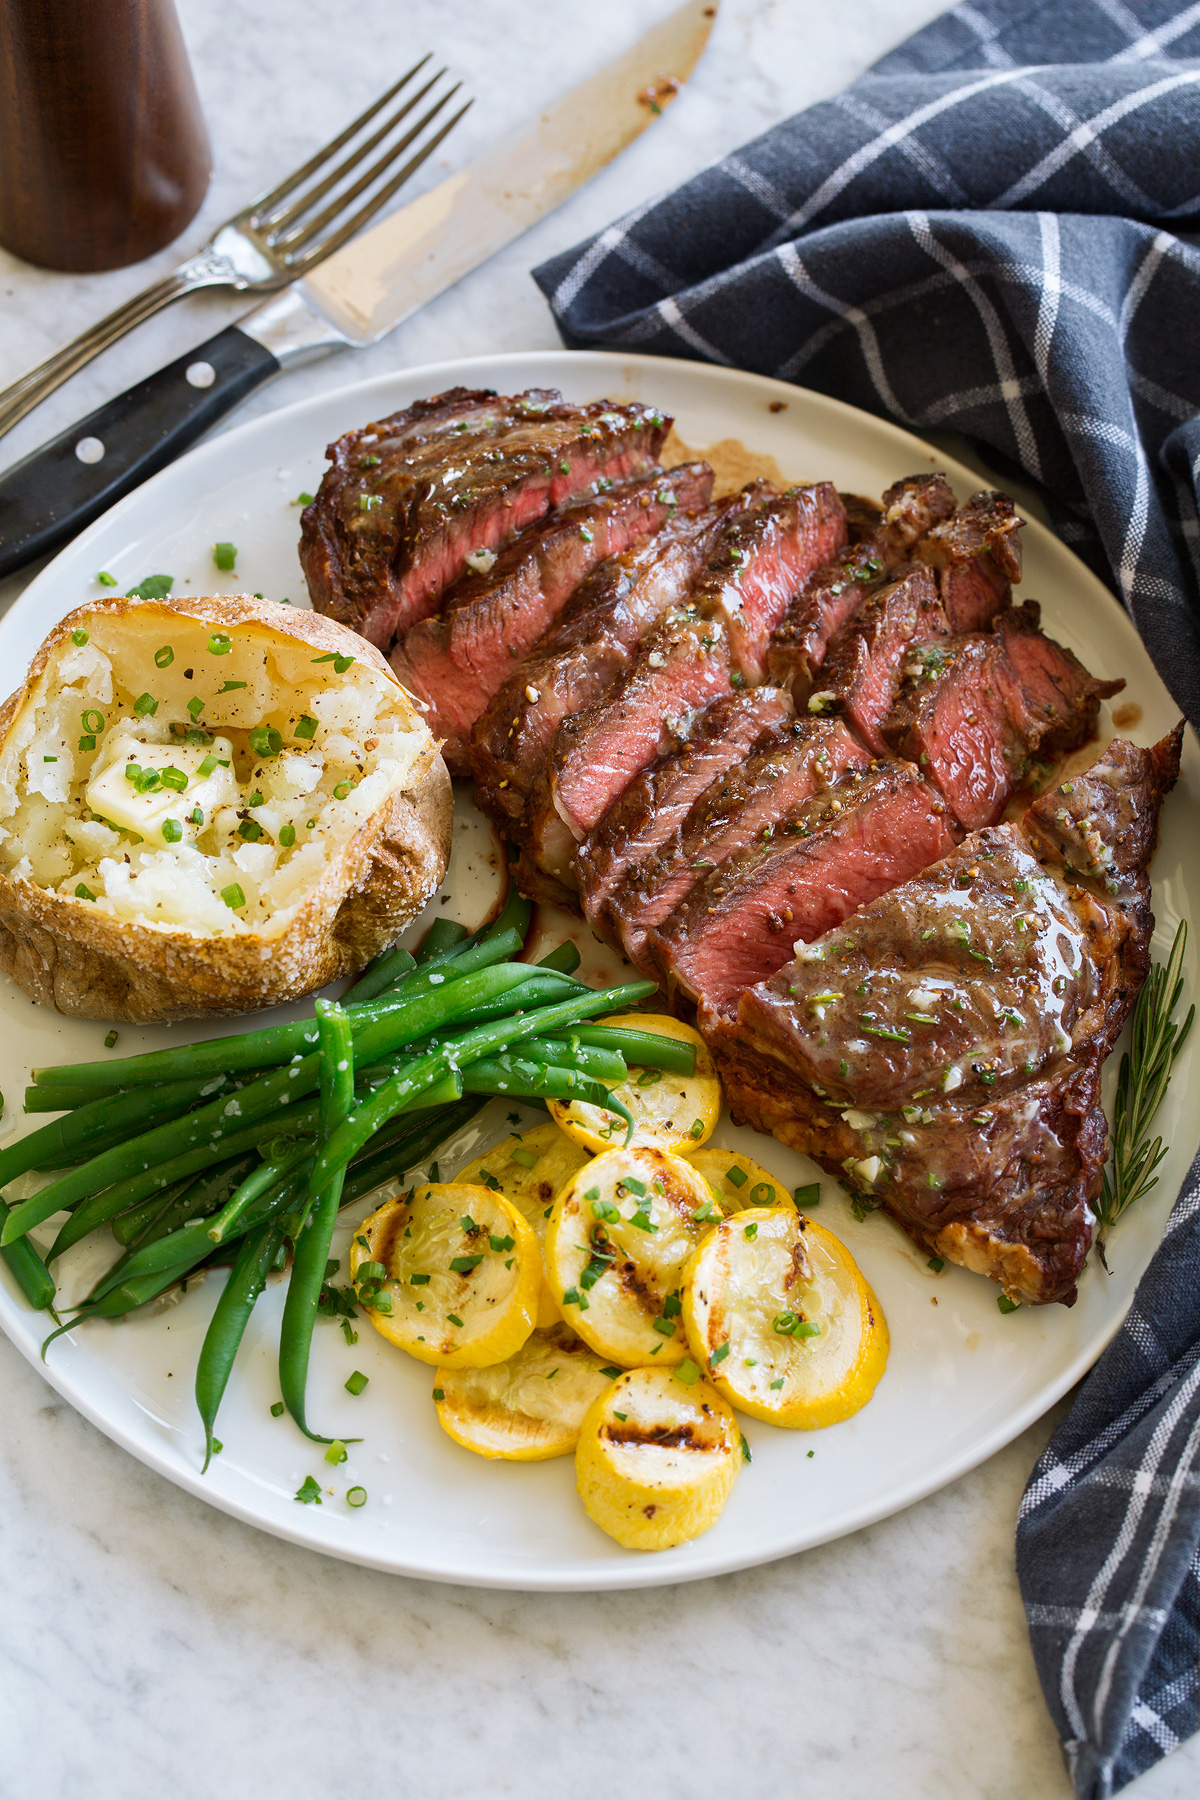 Grilled steak sliced and served with rosemary garlic butter.